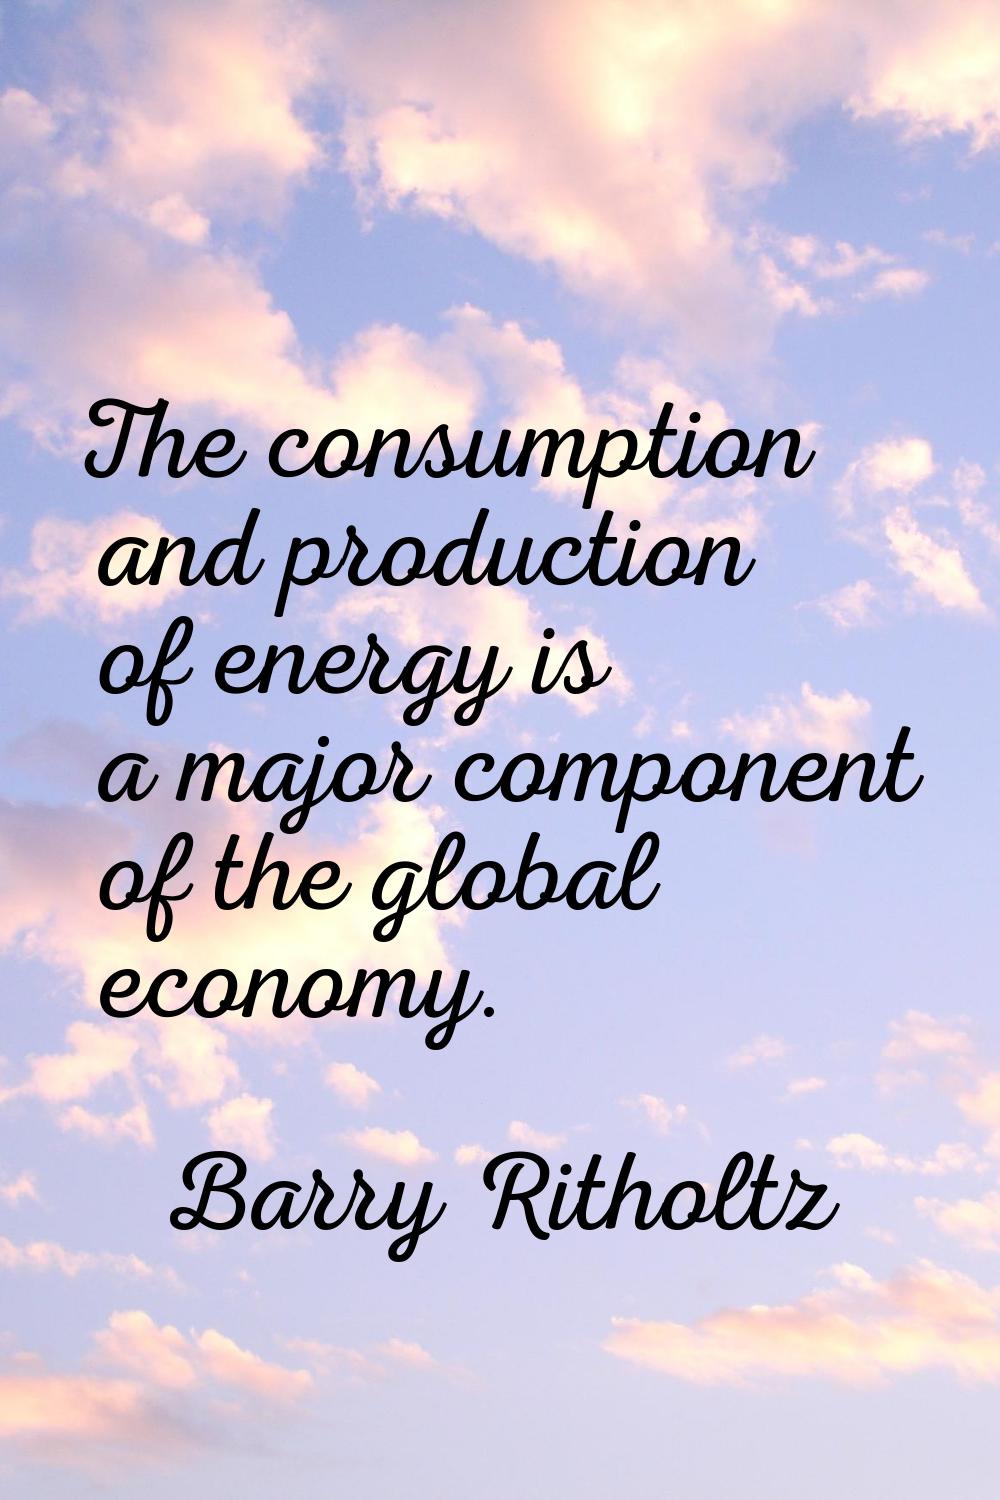 The consumption and production of energy is a major component of the global economy.